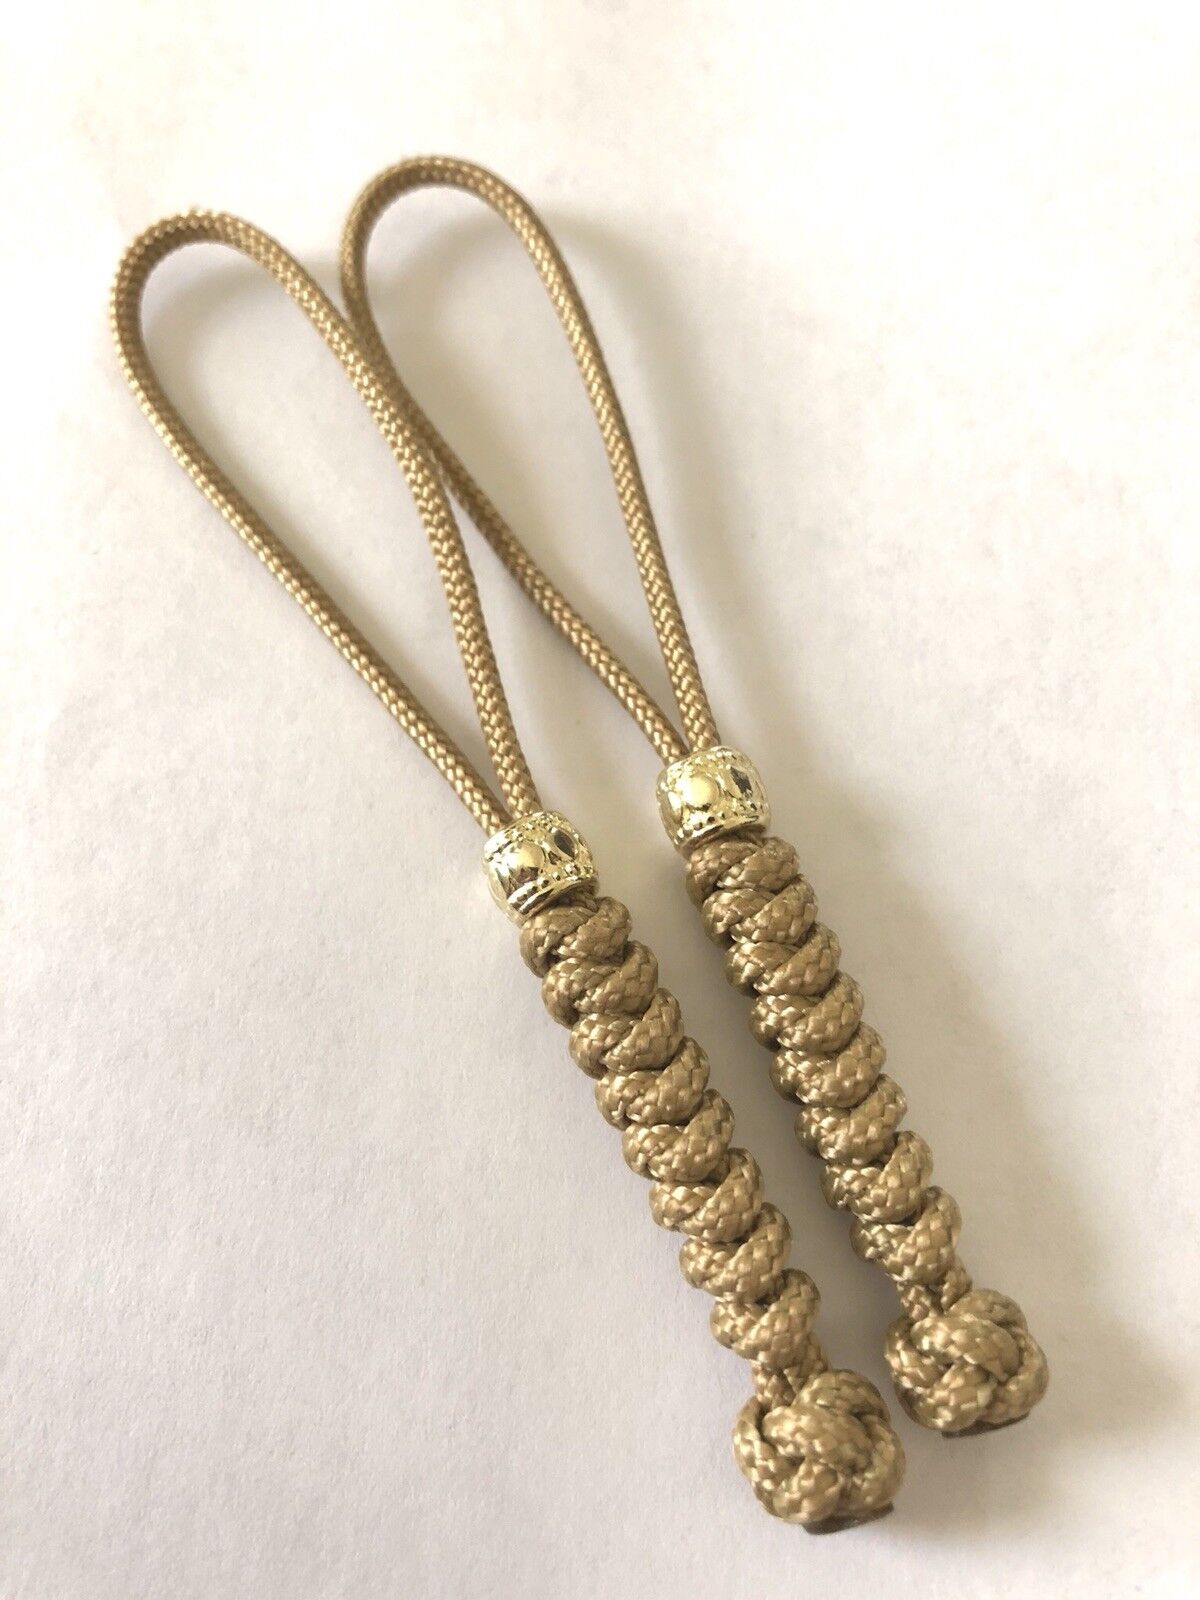 95 Paracord Micro Knife Lanyard 2pk, Gold Cord Snake Knot With Metal Bead